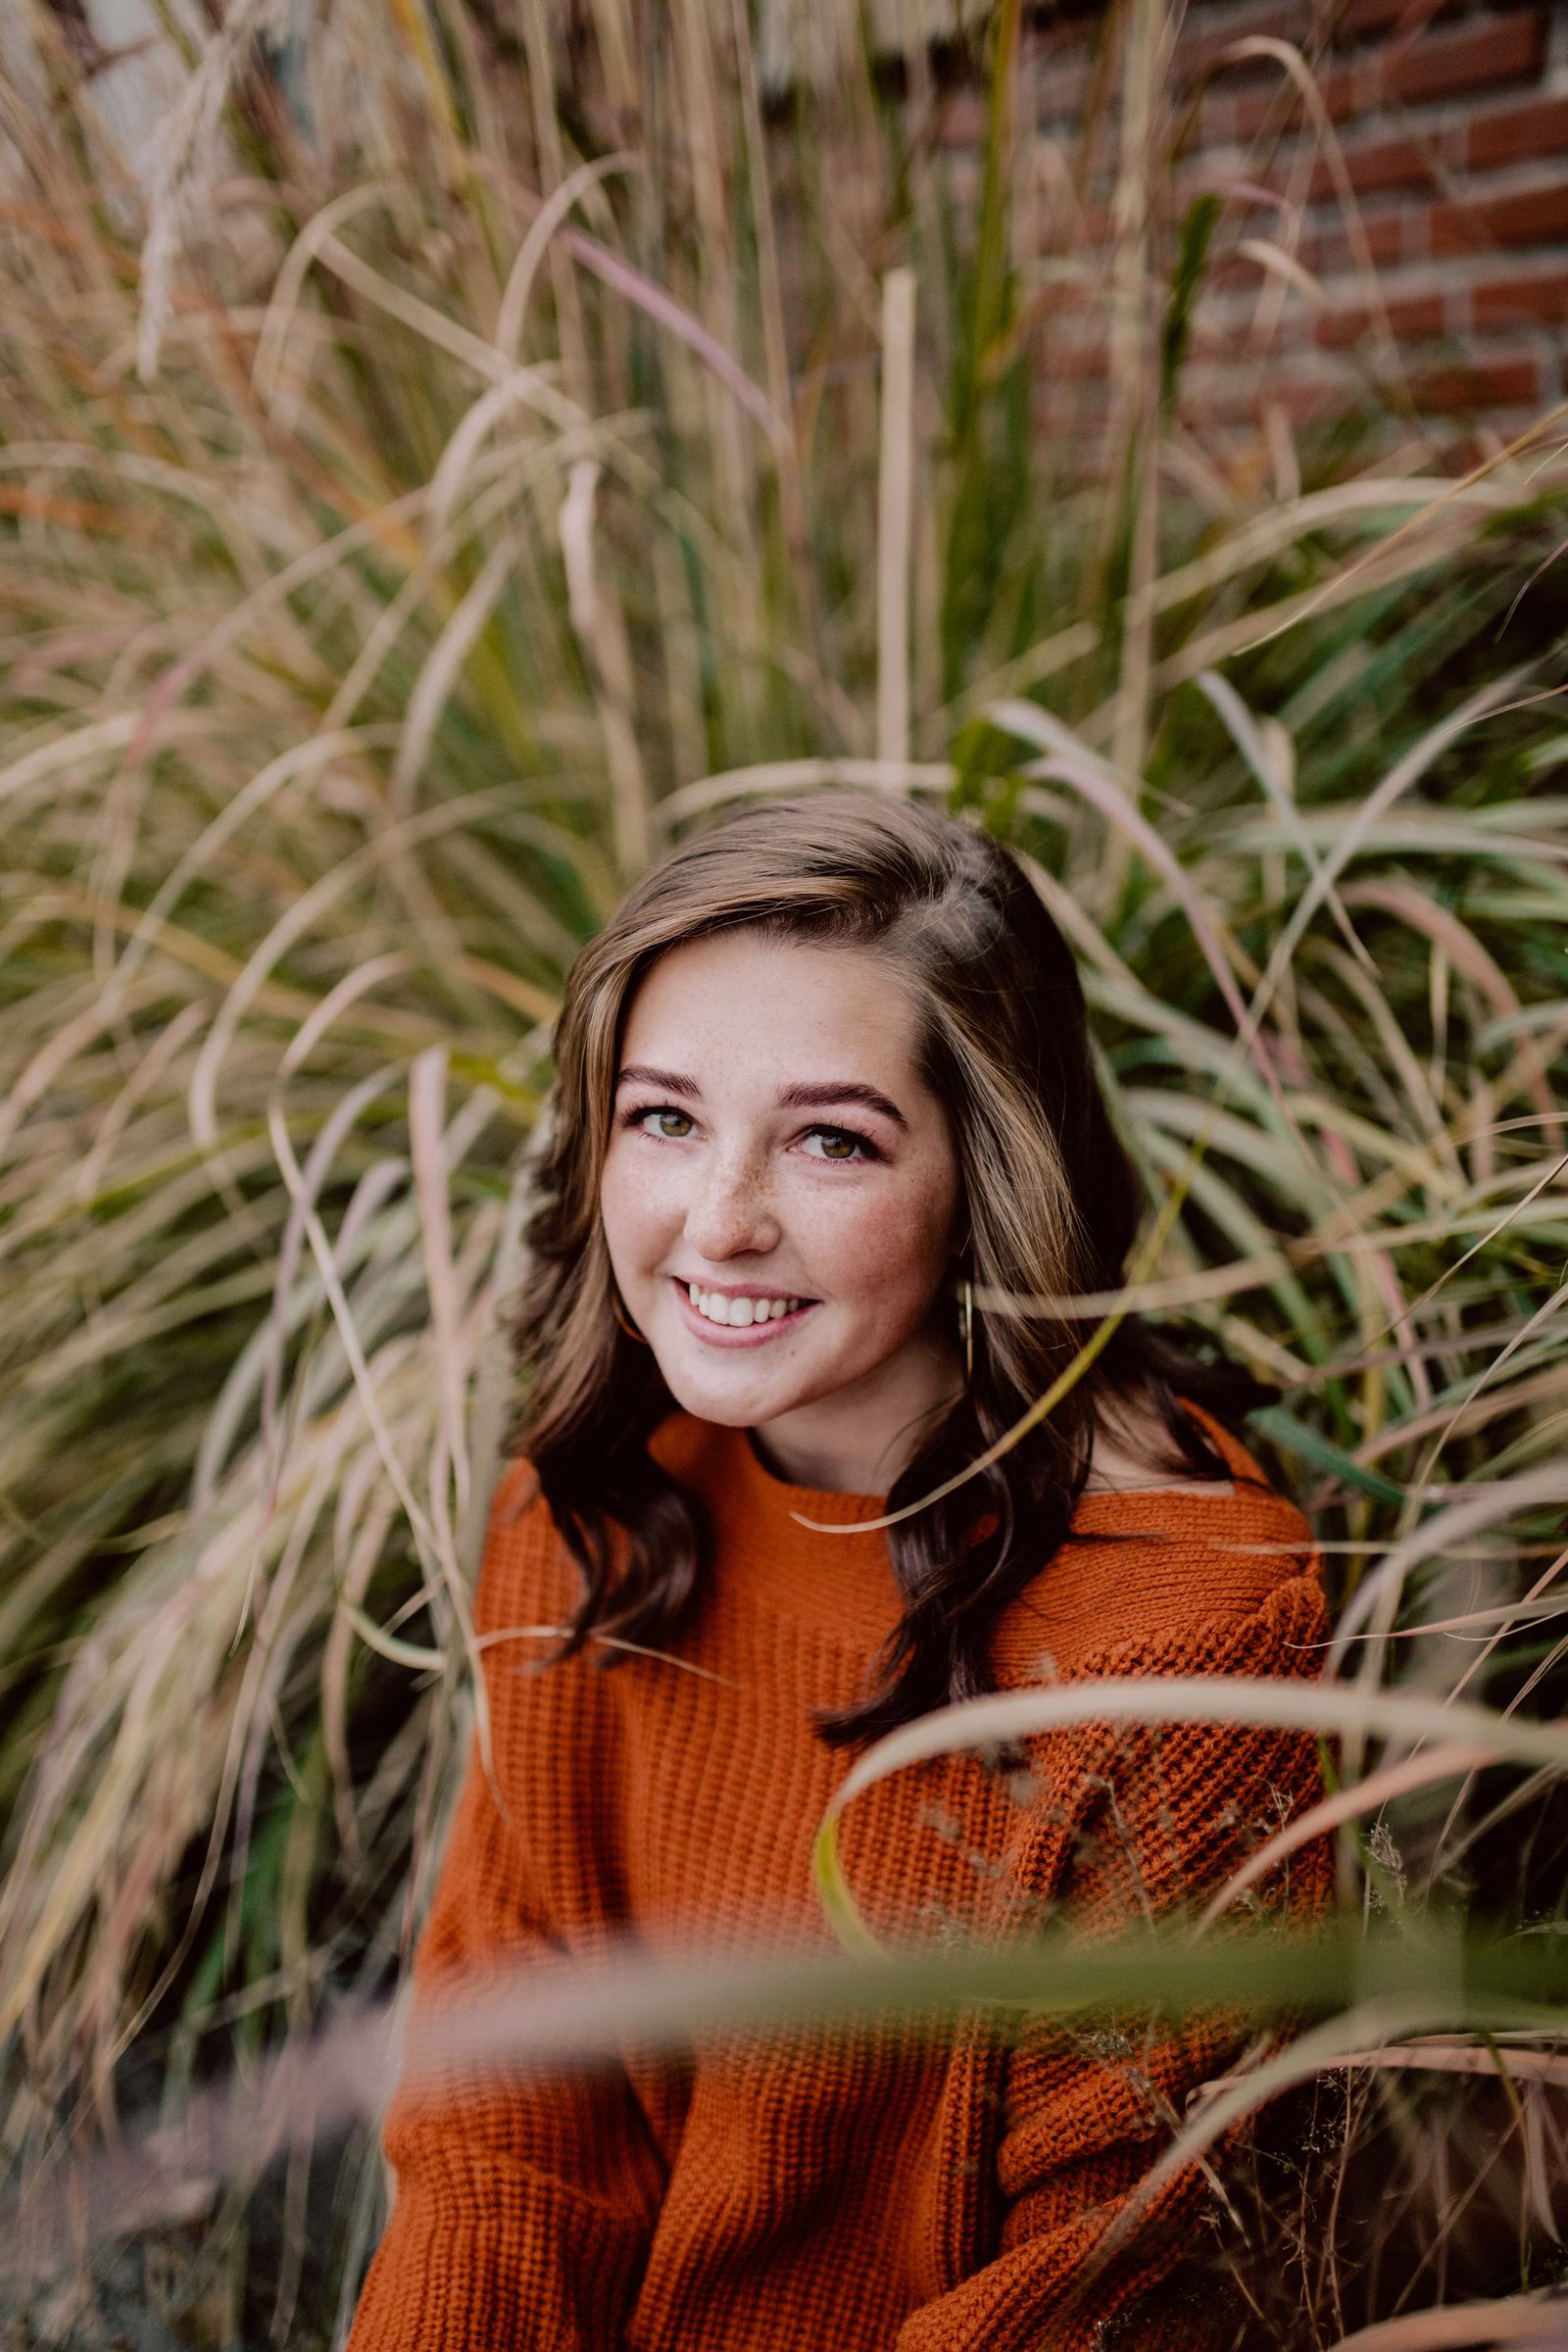 Girl taking senior photo, sitting next to tall green grass. She's smiling and looking at the camera.